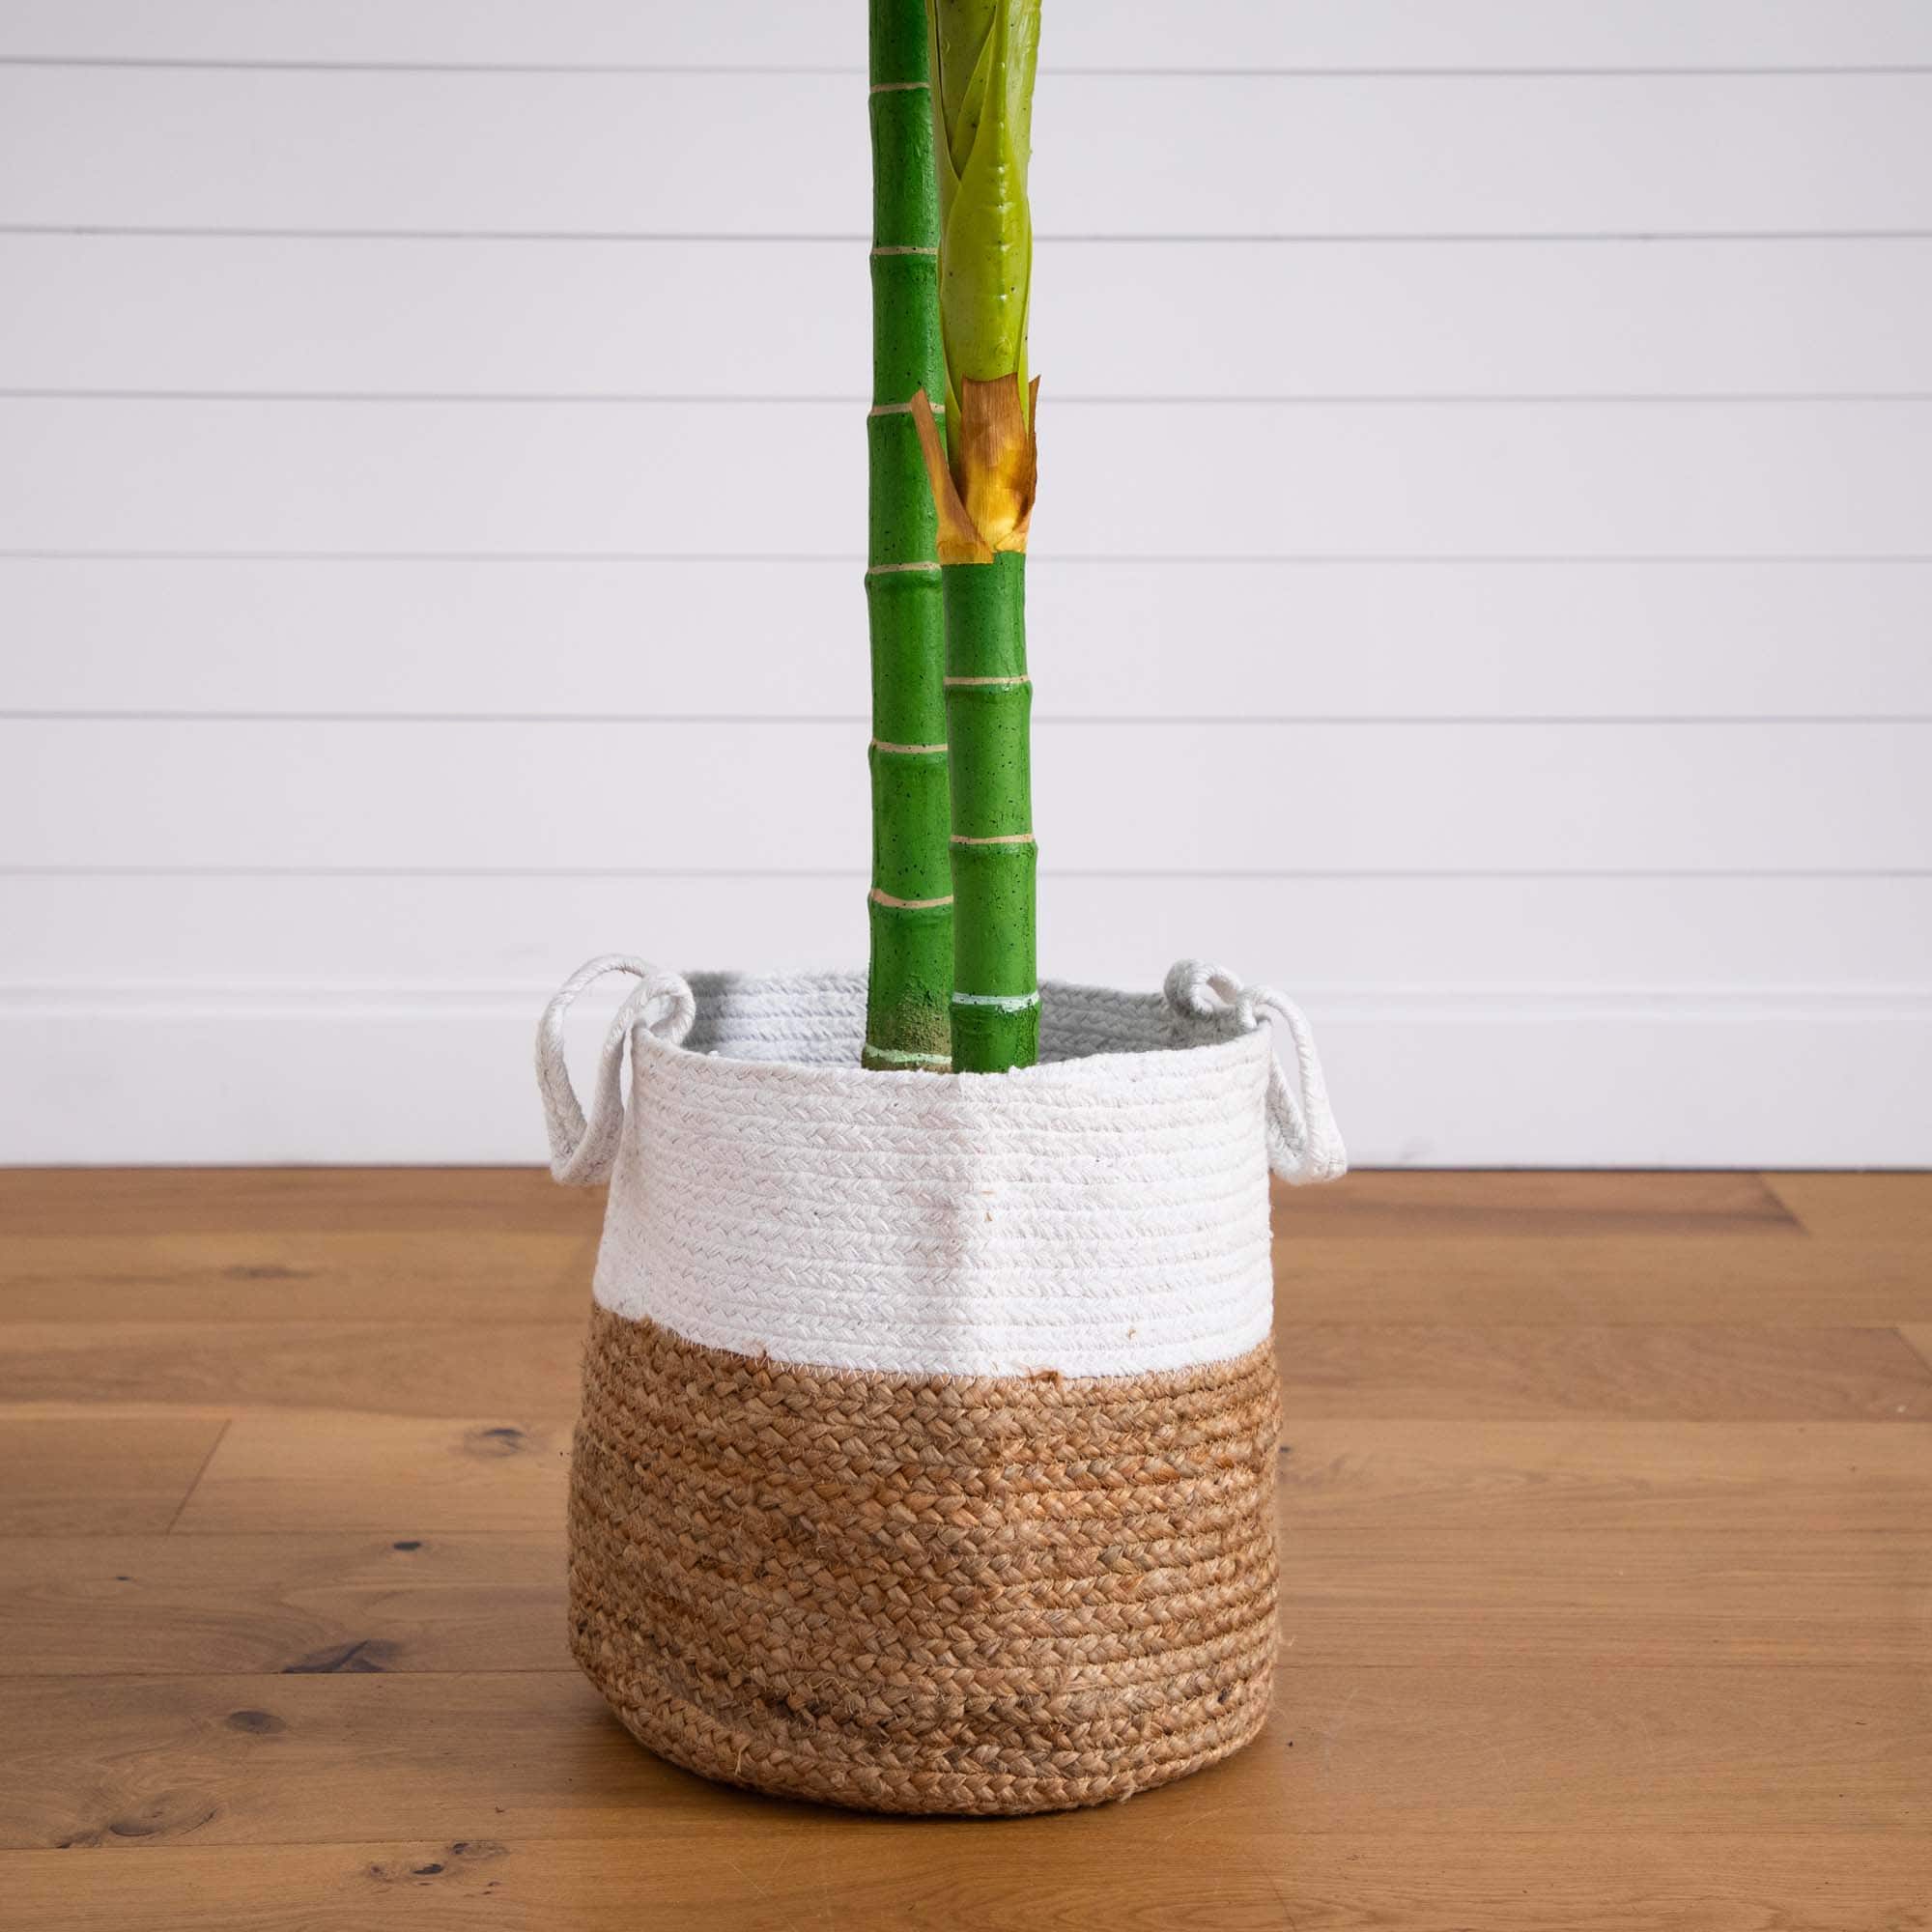 8ft. Golden Cane Palm Tree in Handmade Natural Cotton Planter